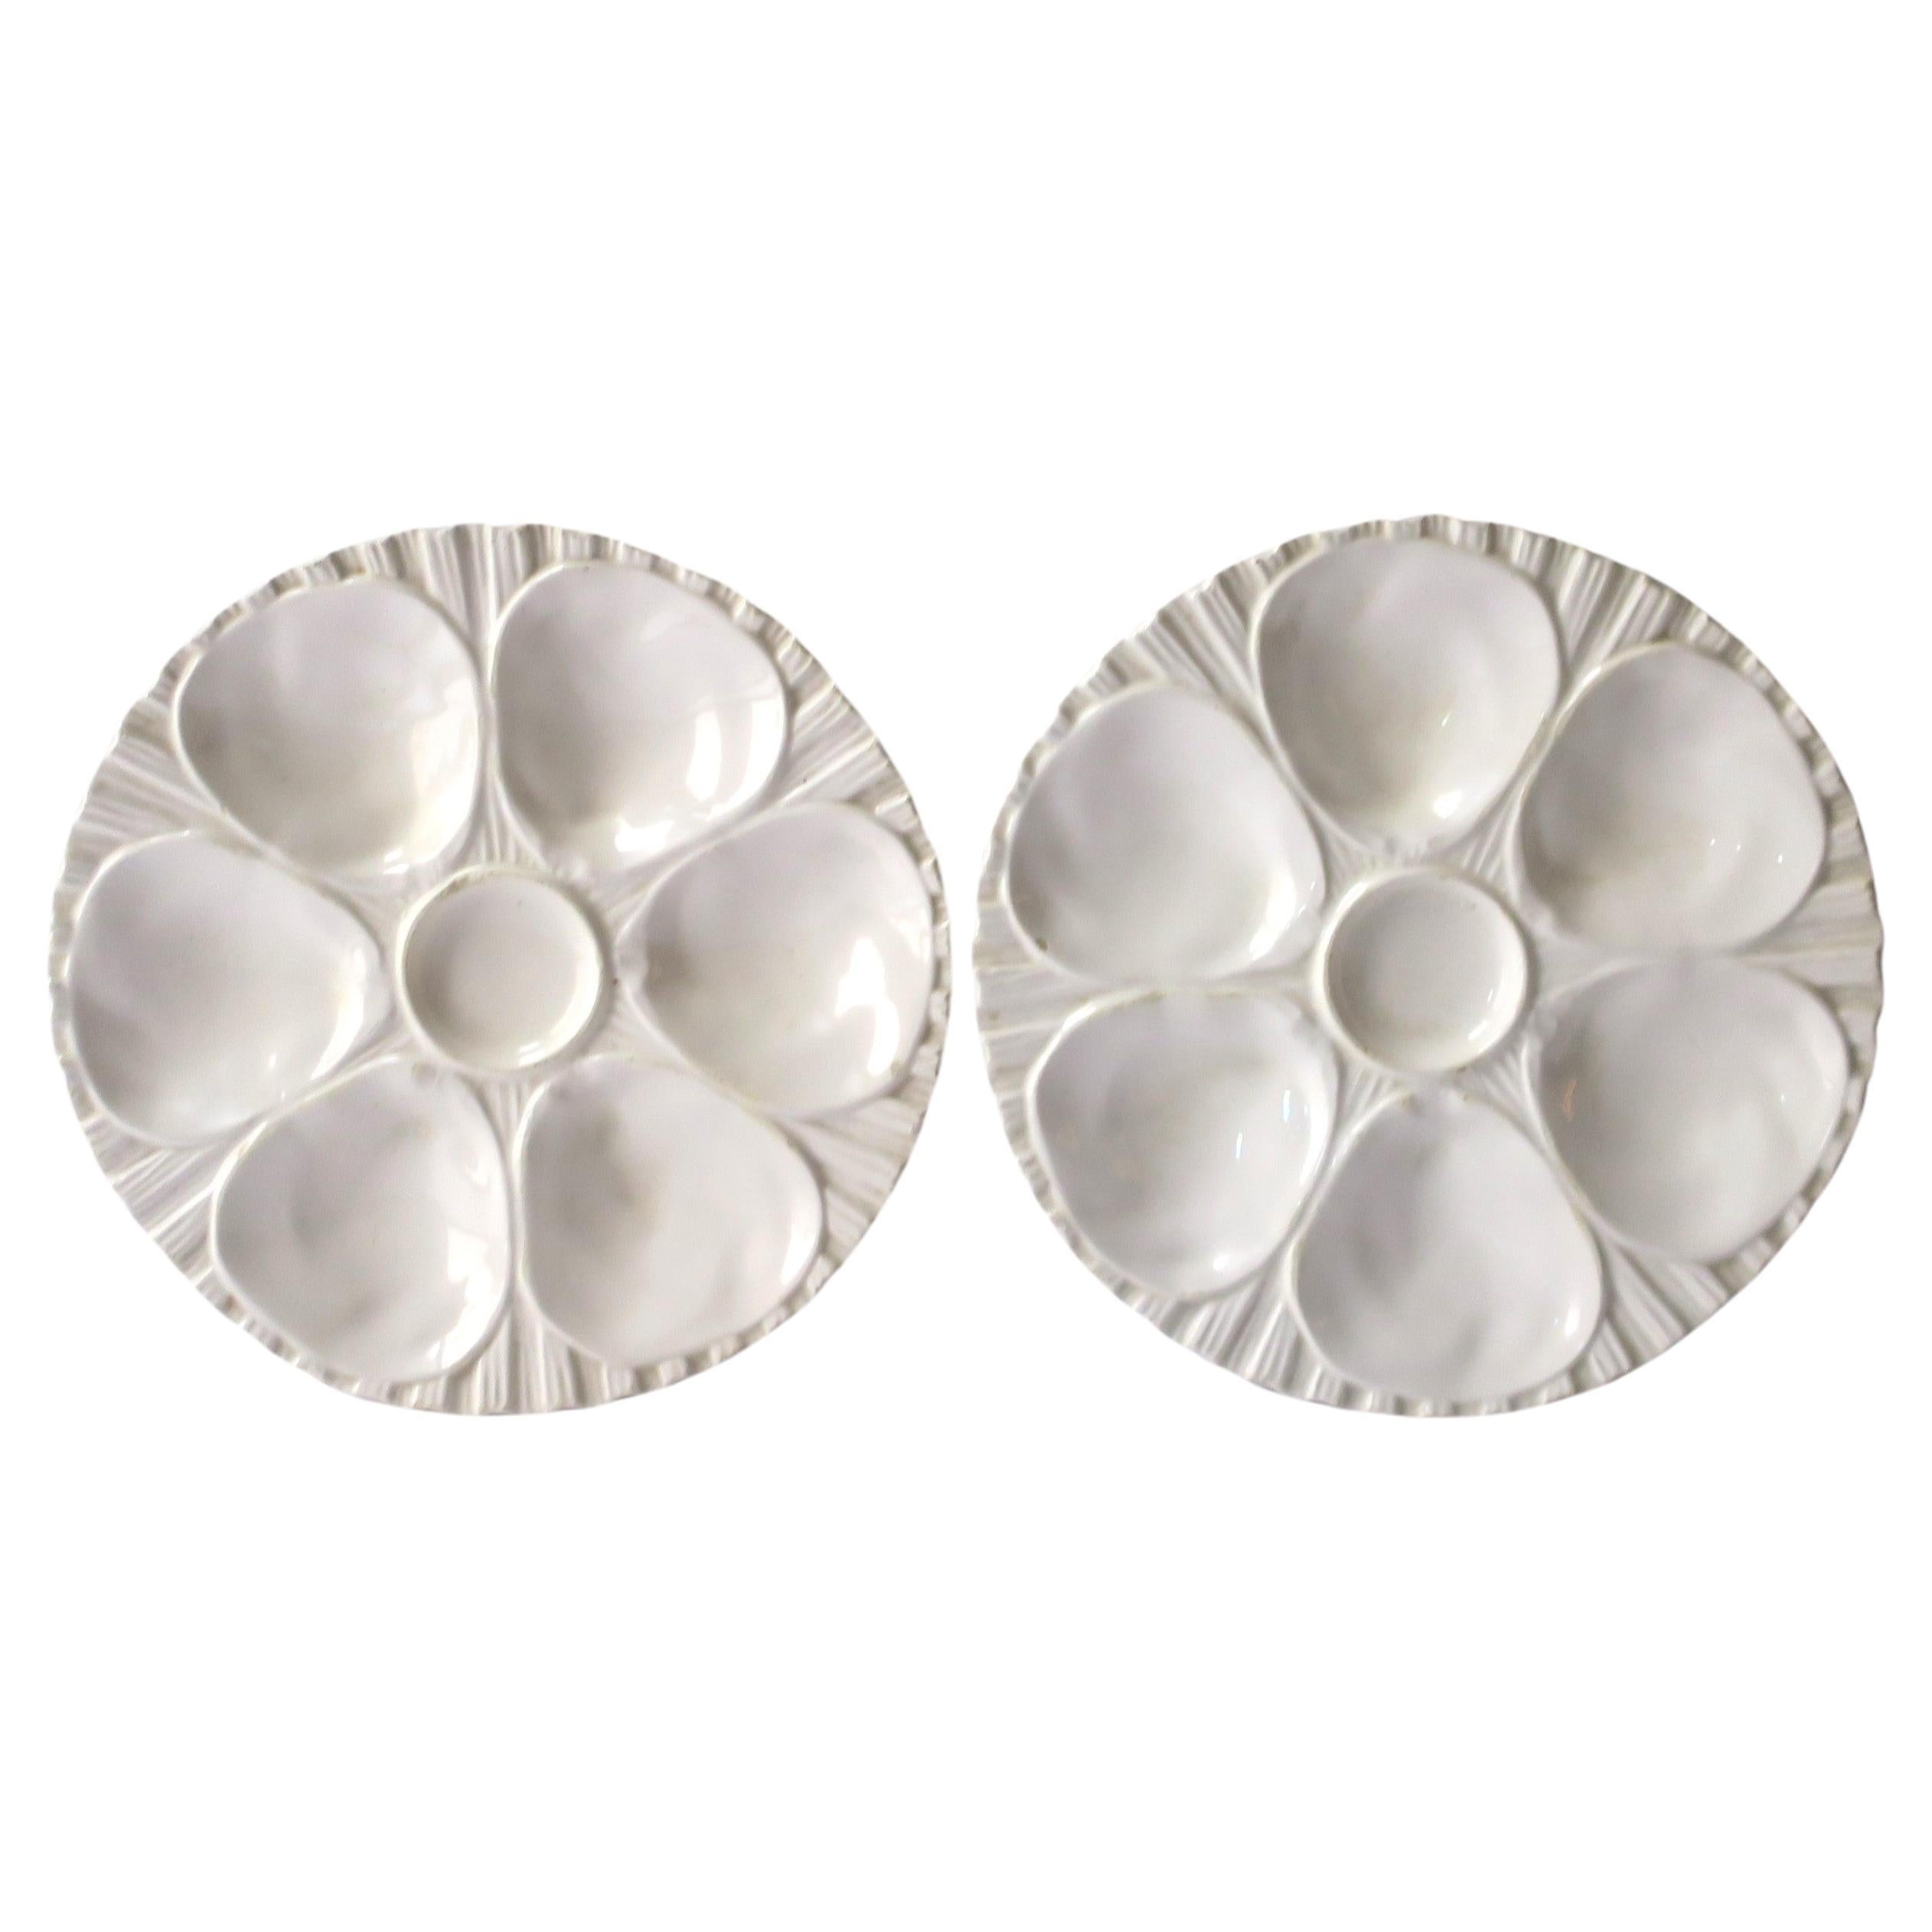 White Oyster Plate, Pair